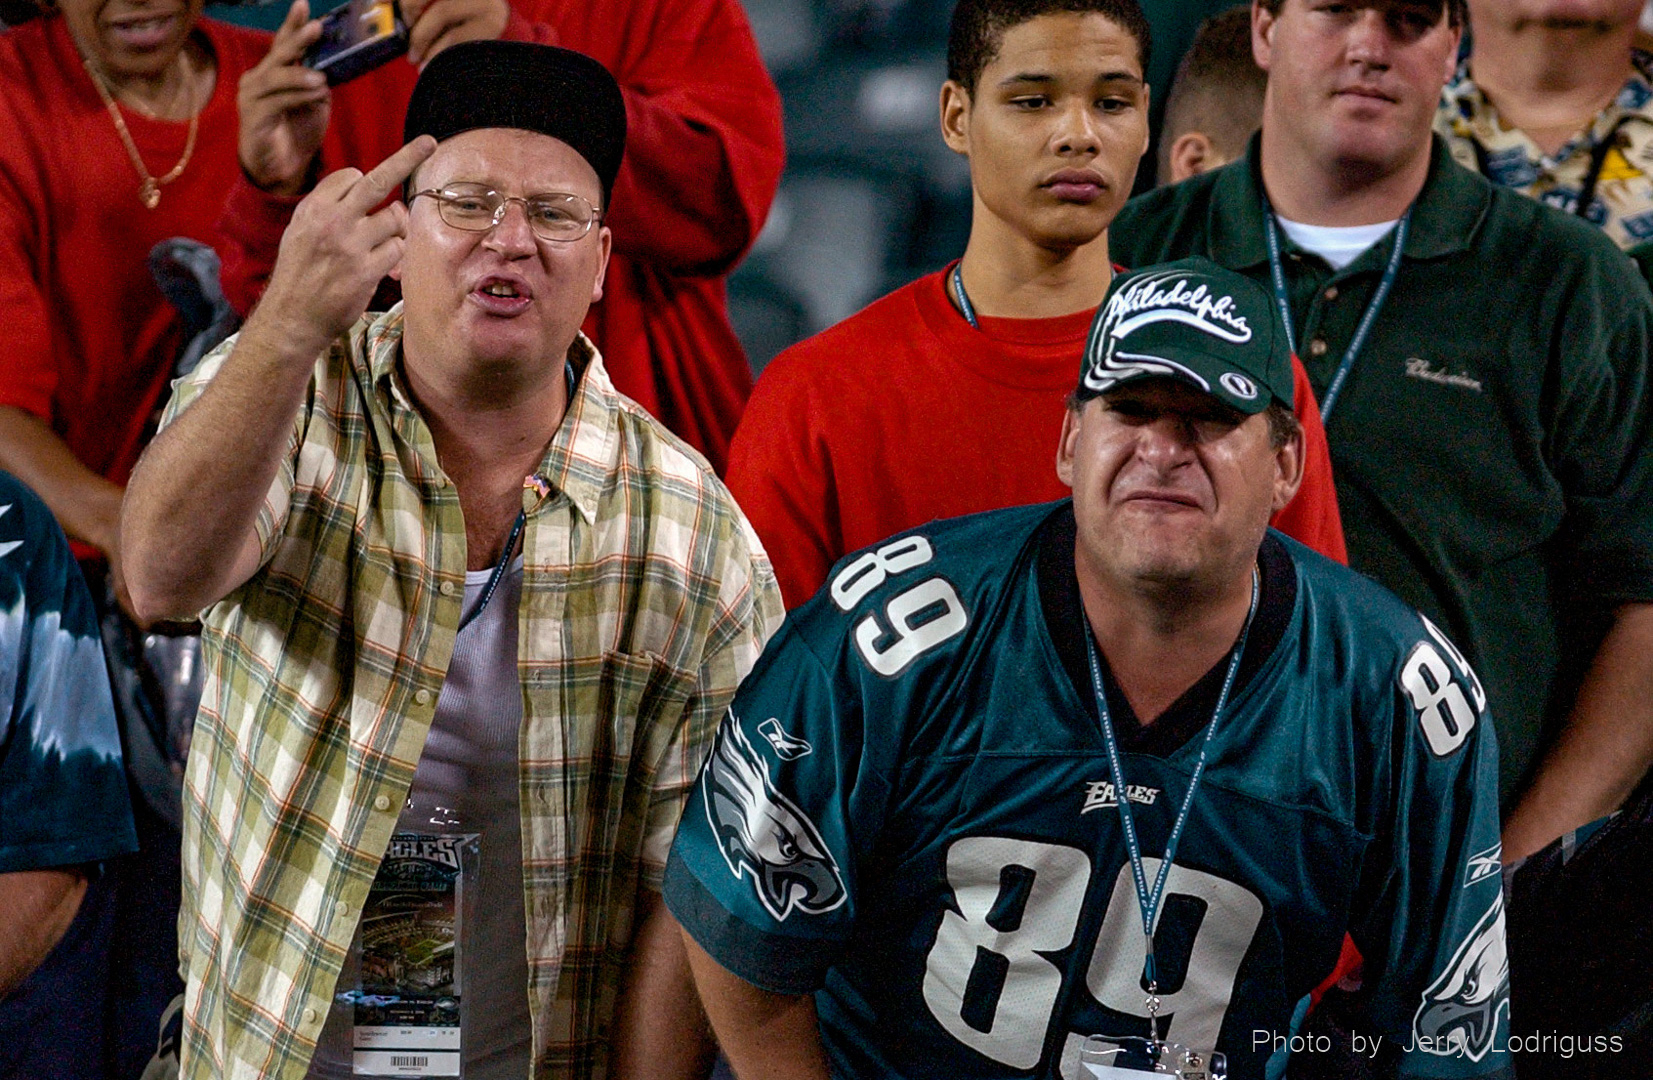 Unidentified Eagles fans express their displeasure by screaming obscenities at Eagles coach Andy Reid as he leaves the field after the Eagles 17-0 loss to Tampa on Monday September 8, 2002.